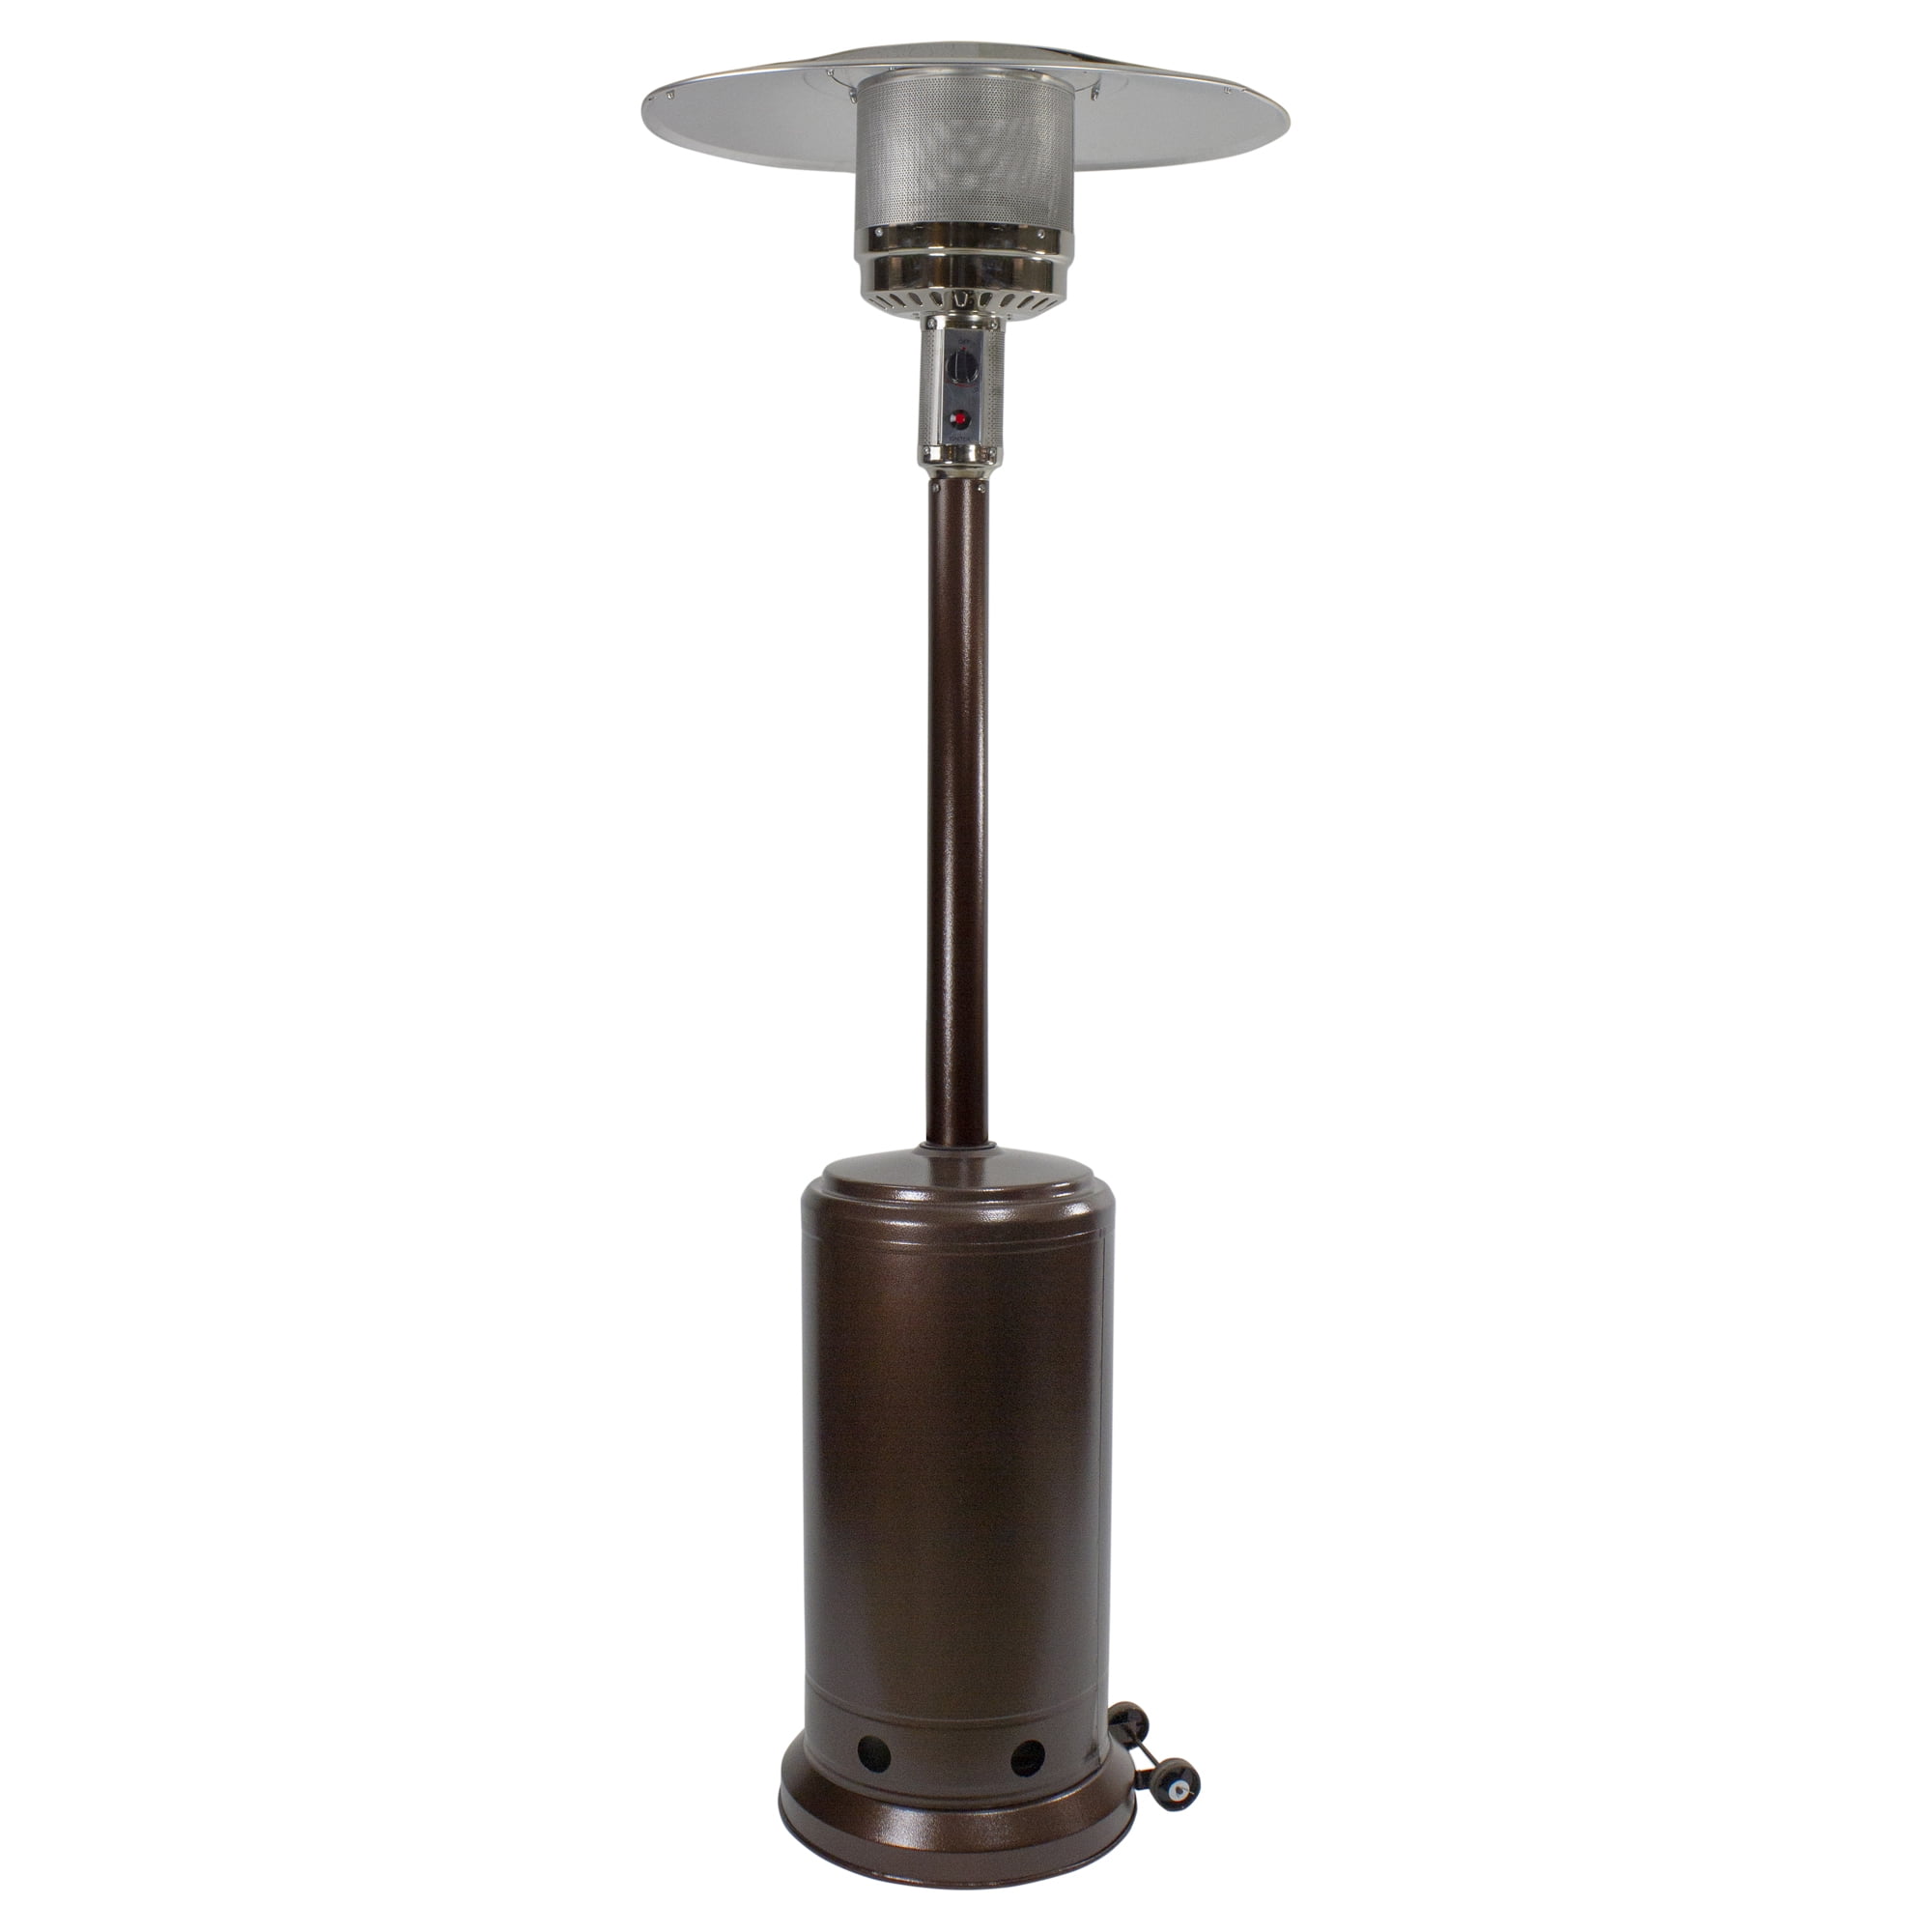 Suitable For Garden Wedding With Cover Outdoor Table Top Heater With Adjustable Thermostat Kracie Patio Heater Propane Patio Heater 46 000 Btu Standing With Cover And Wheels Large Outdoor Heating Patio Heaters Ekoios Vn